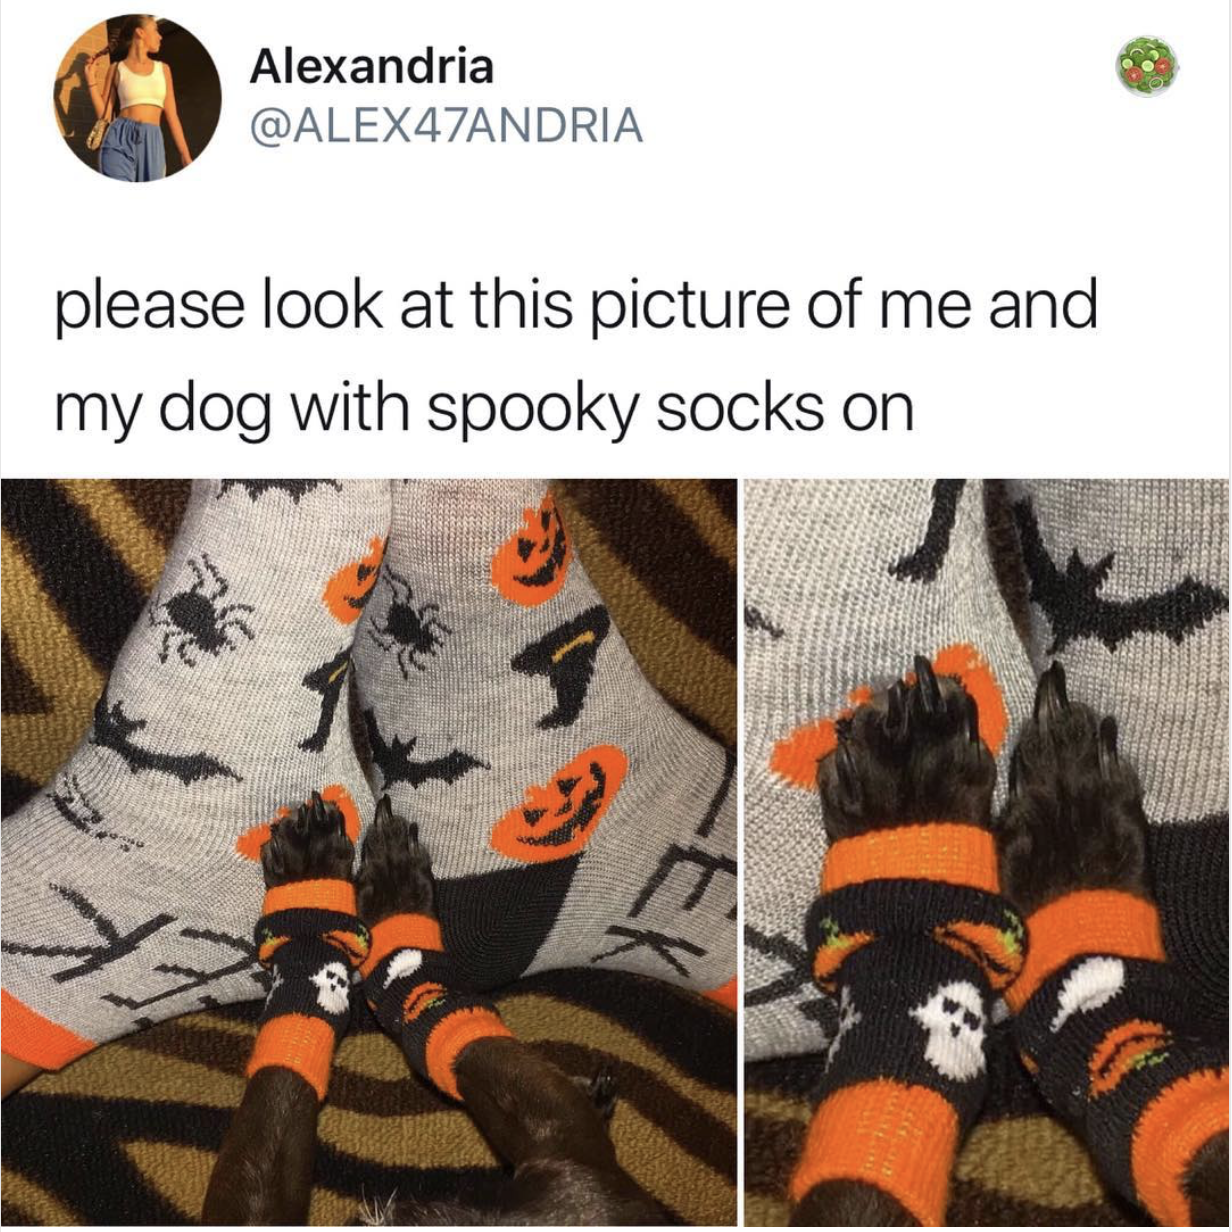 memes - spooky socks for dogs - Alexandria please look at this picture of me and my dog with spooky socks on